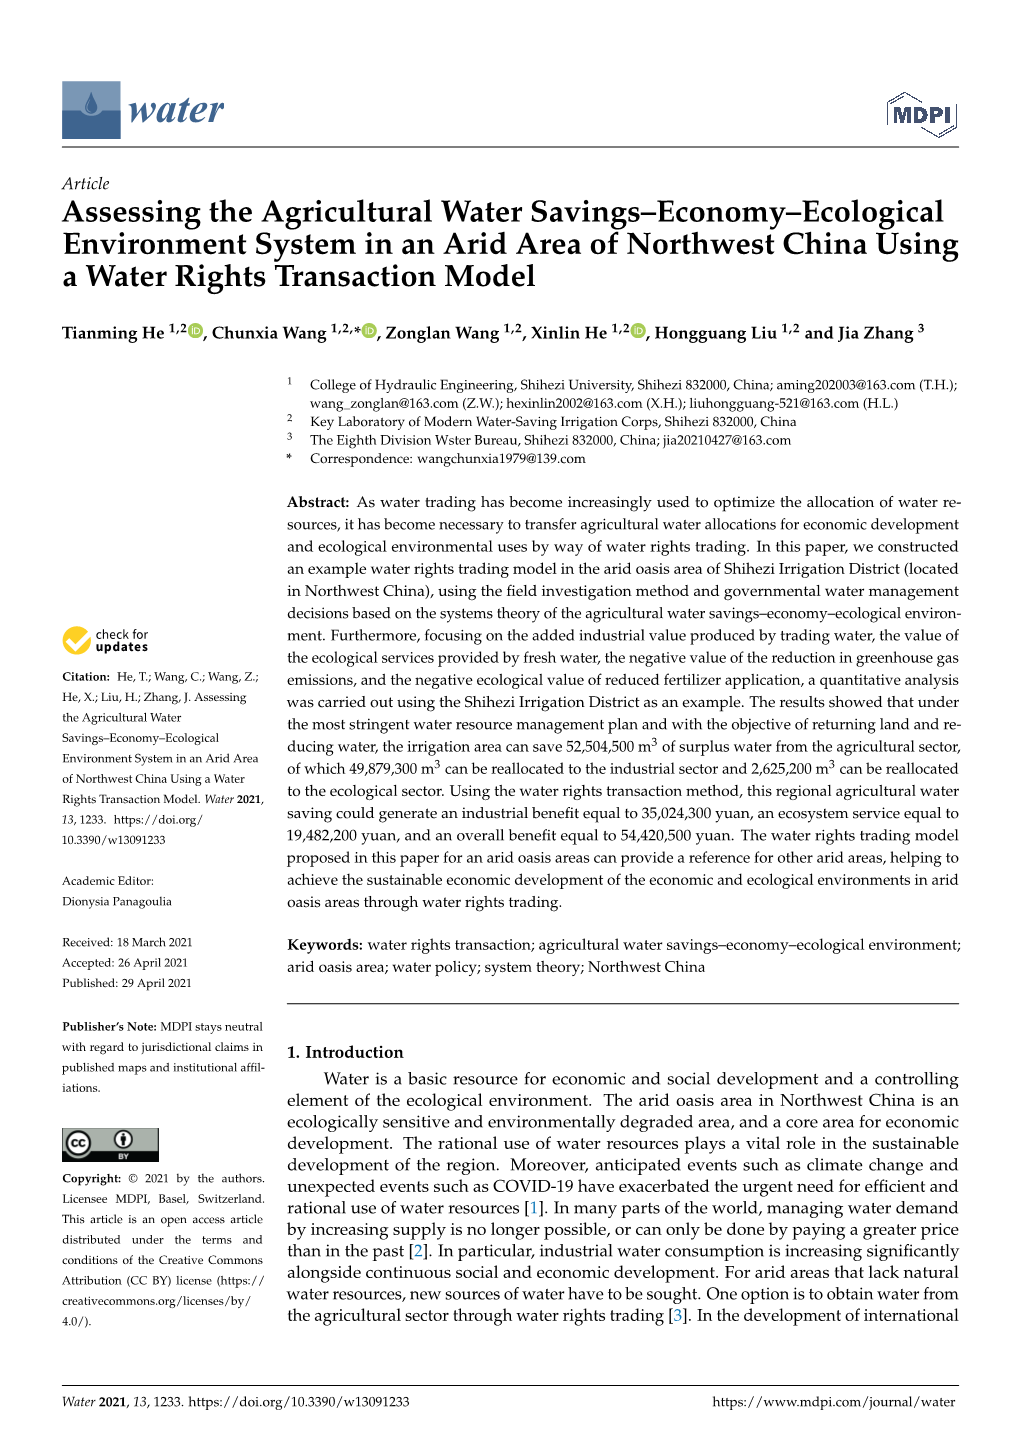 Assessing the Agricultural Water Savings–Economy–Ecological Environment System in an Arid Area of Northwest China Using a Water Rights Transaction Model